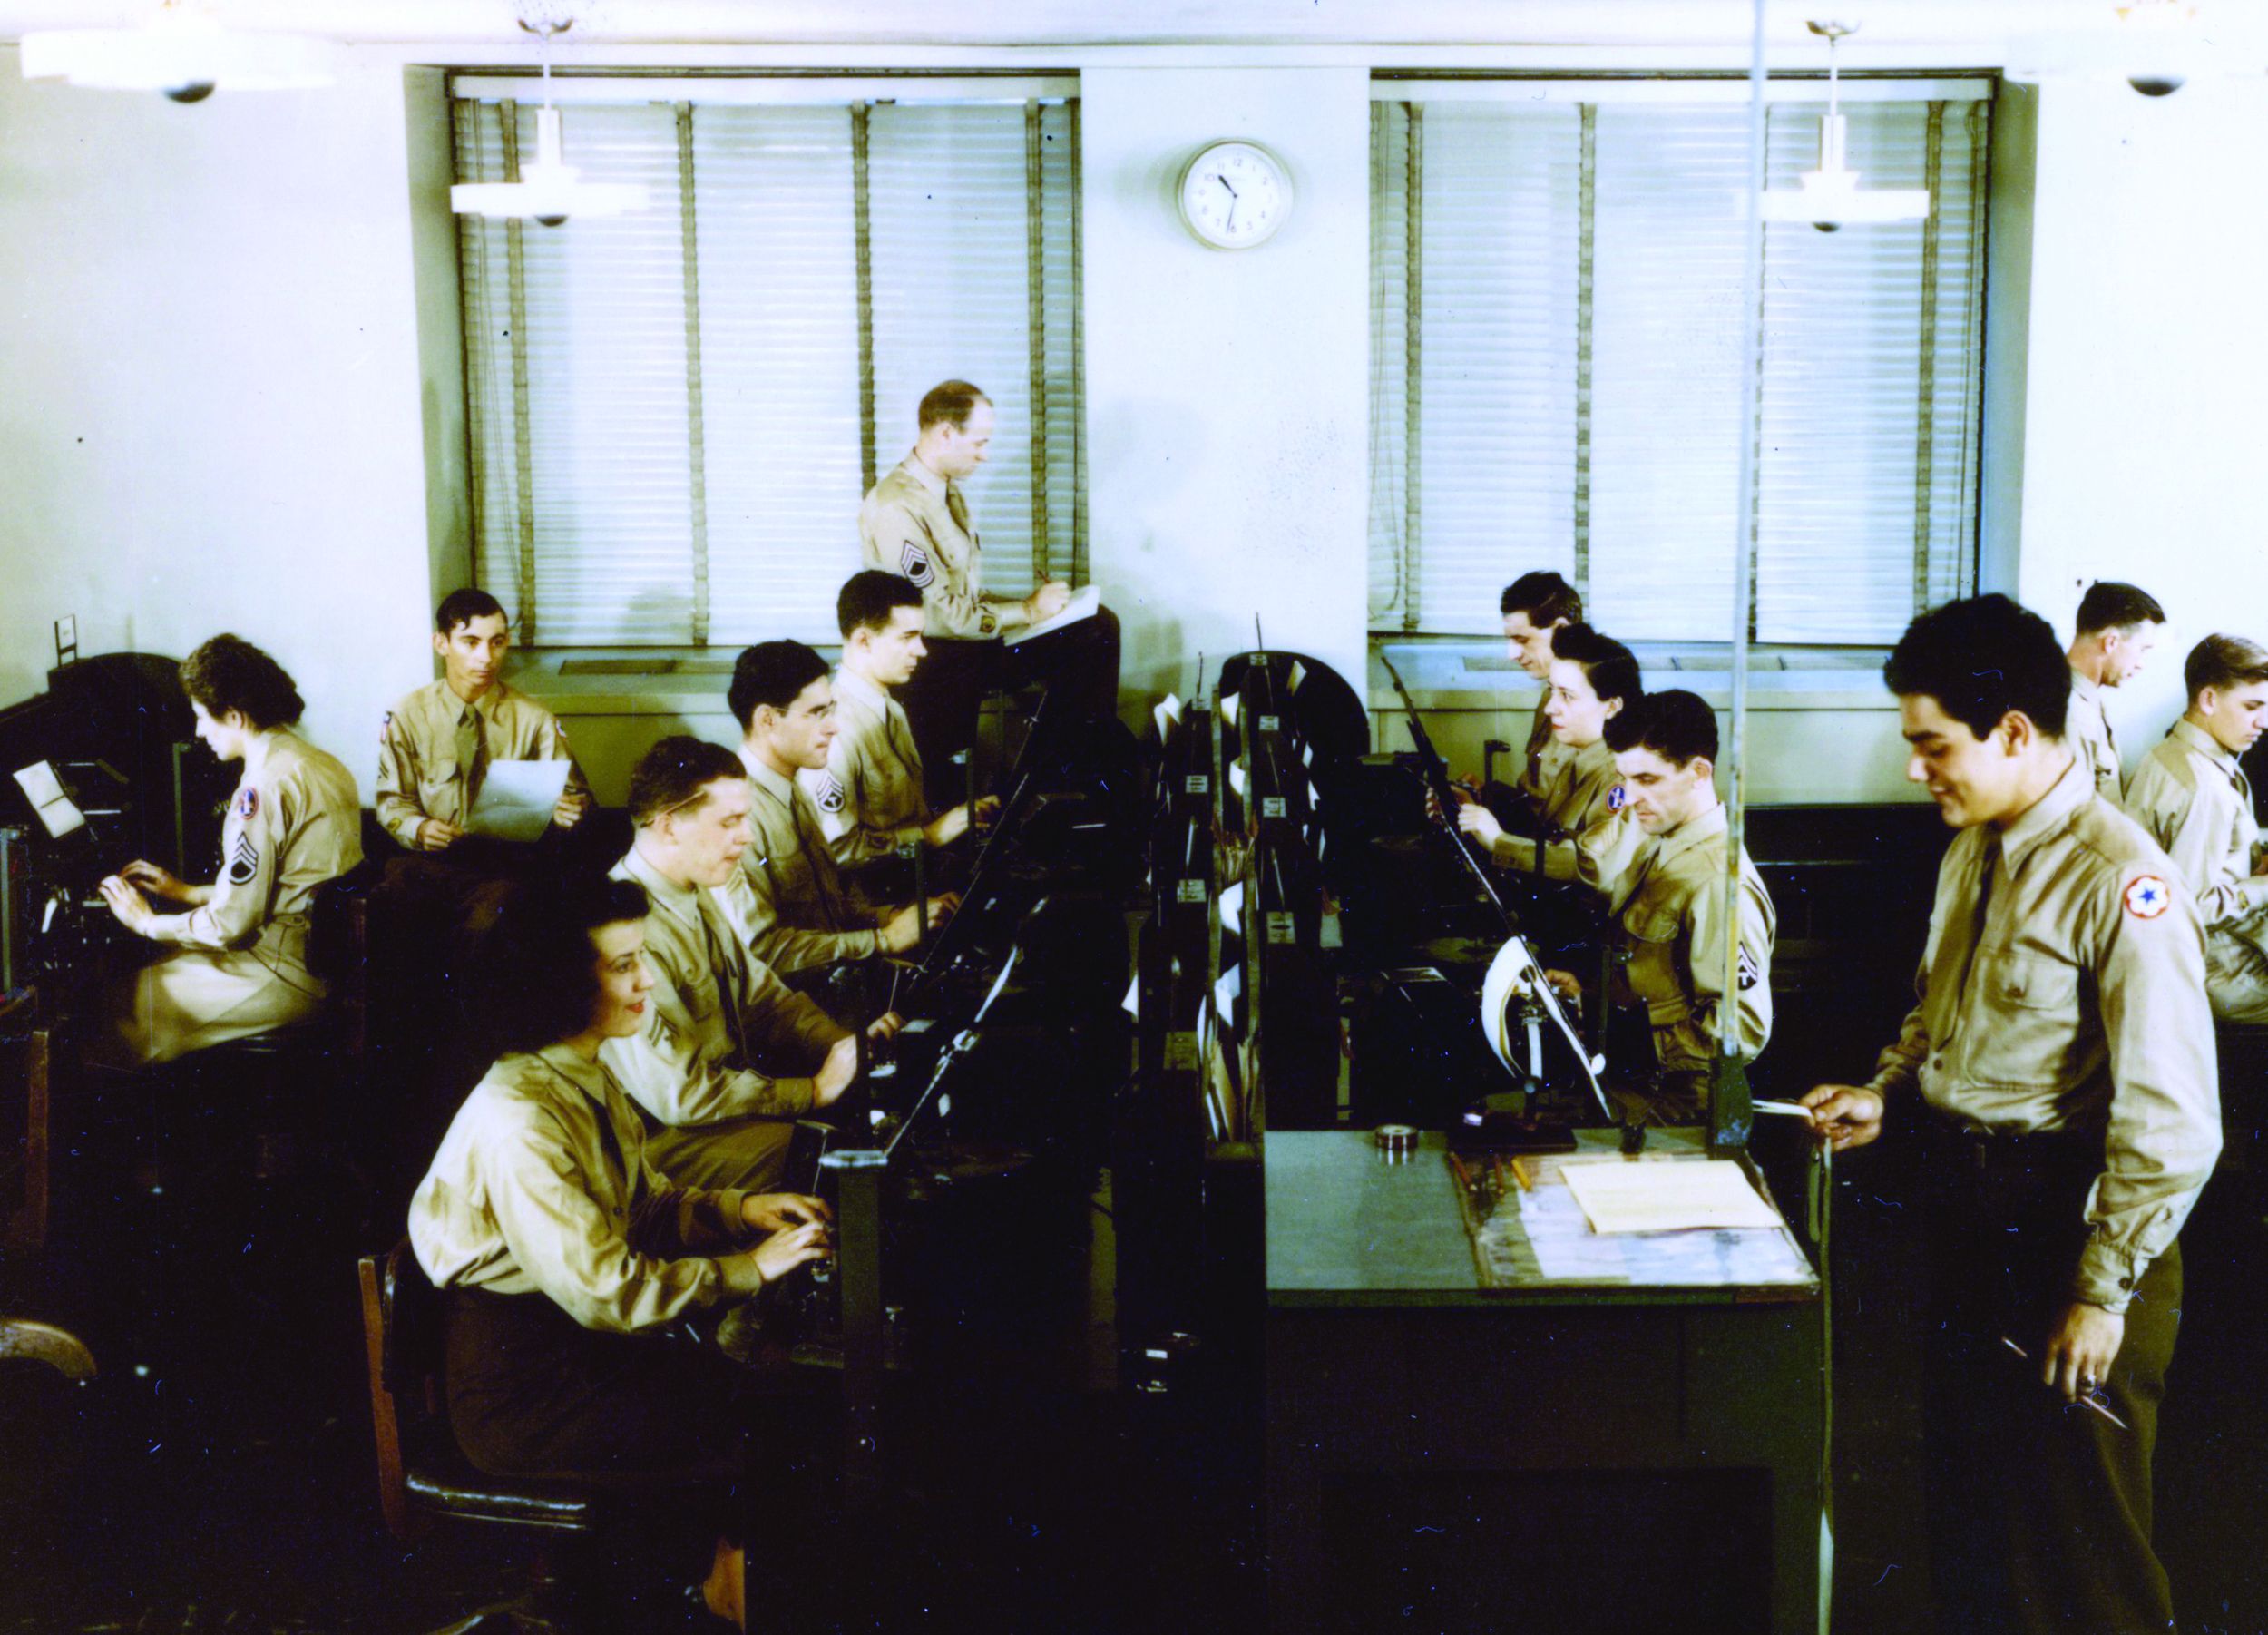 At the Pentagon Signal Center’s message perforating section, communications were received via a belt carrier, perforated, and then passed along through a tube system before transmission. Those who handled messages received varying levels of security clearance.